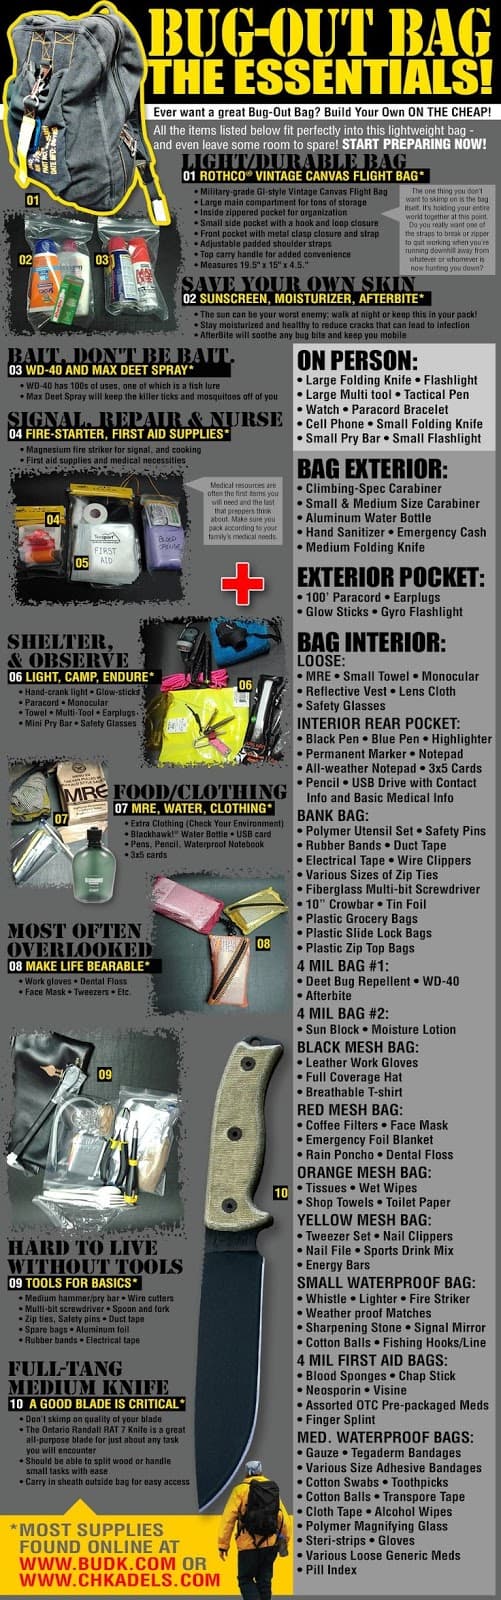 bug out bag guide